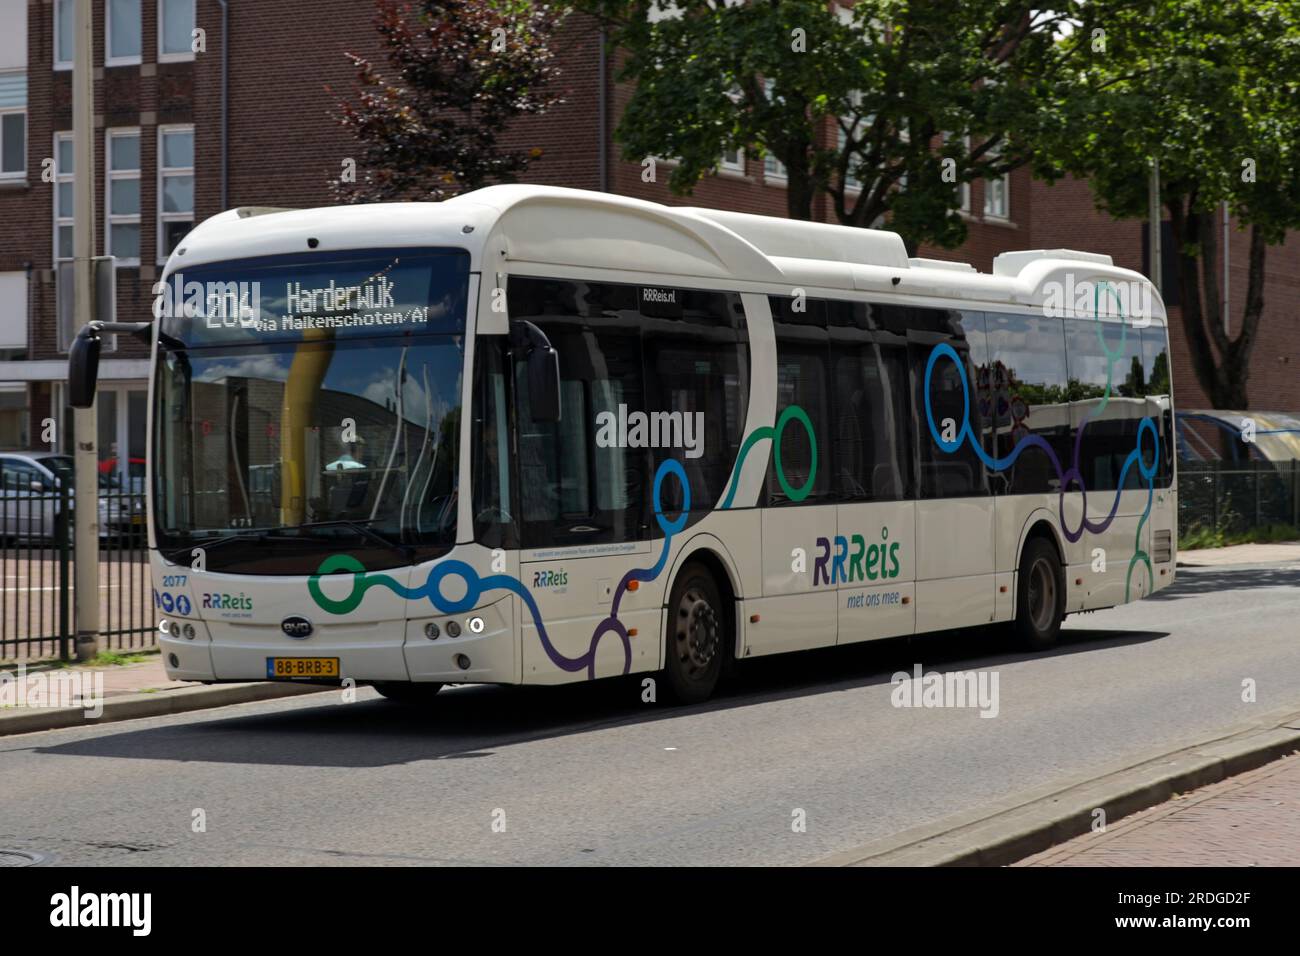 Electrical busses of RRReis runned by EBS at Apeldoorn station in the Netherlands Stock Photo